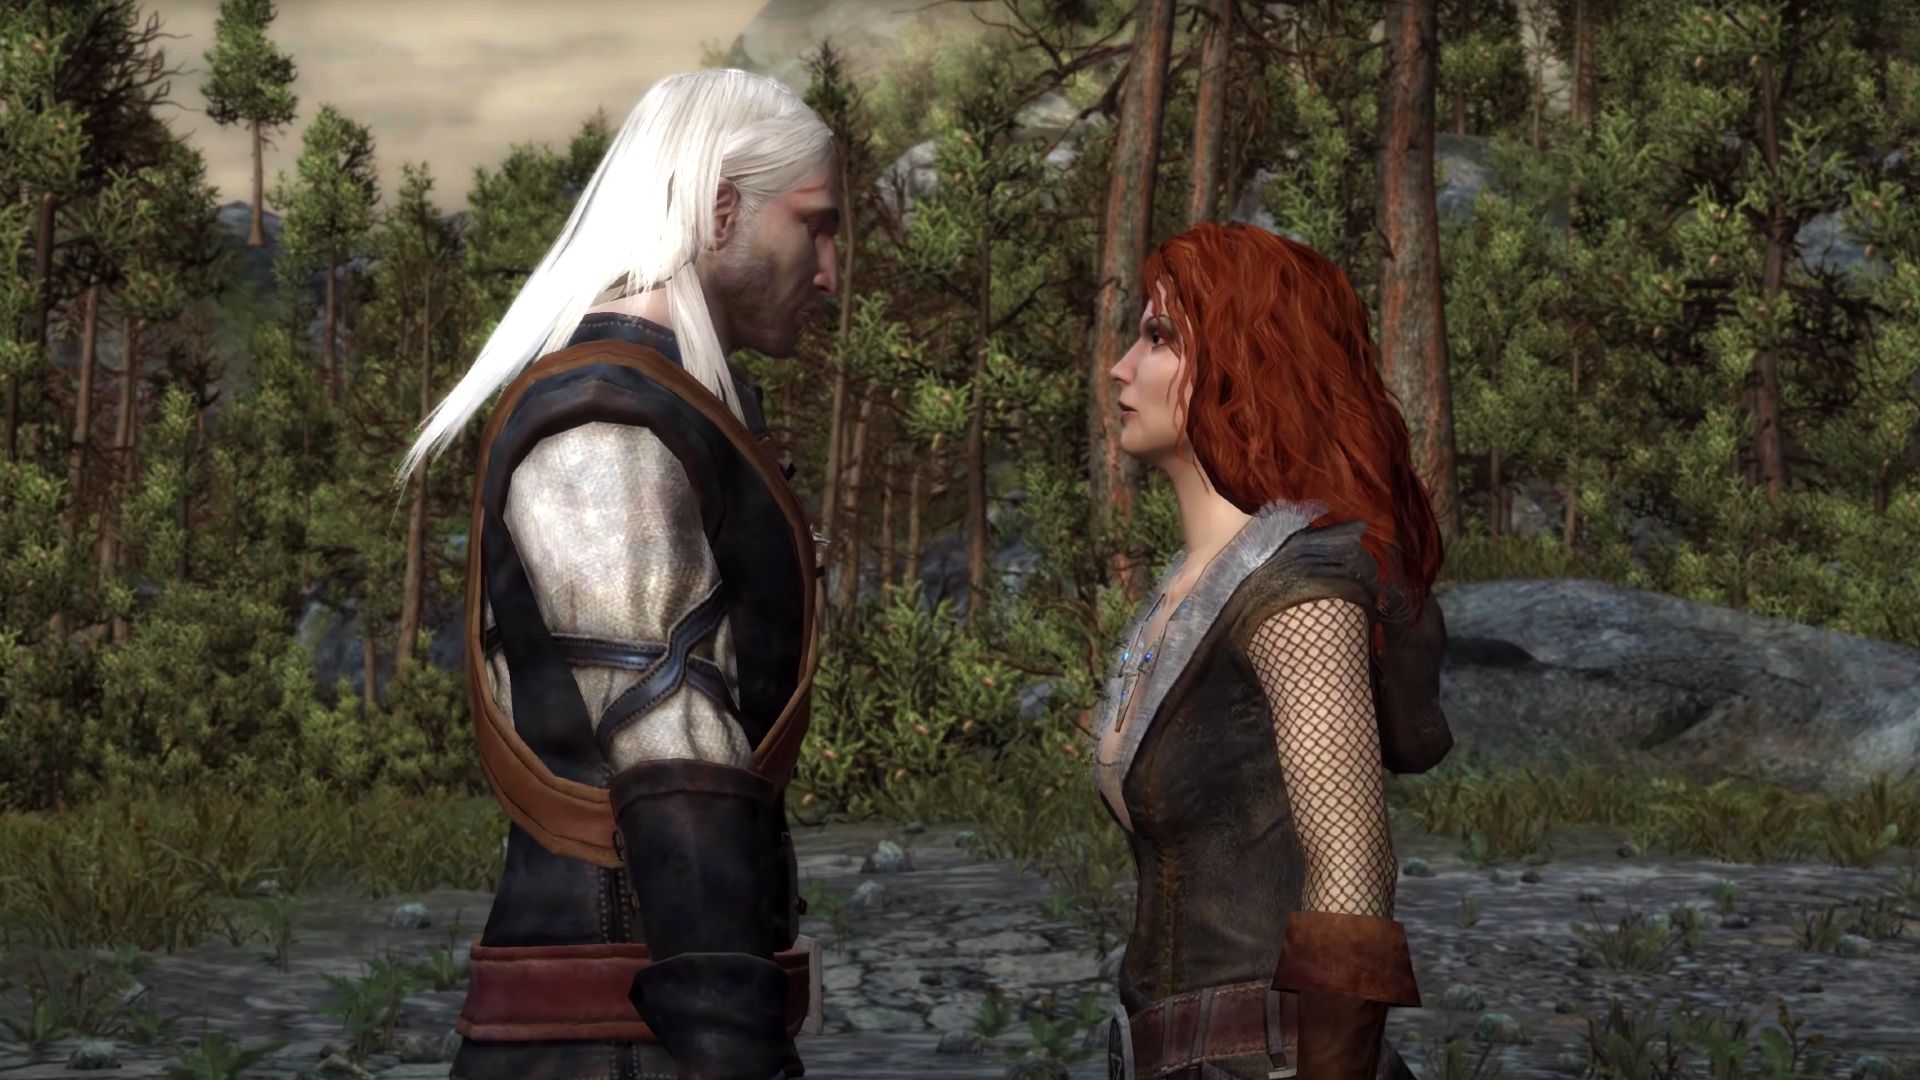 Witcher 1 Remake as a quick way for CDPR to bounce back?